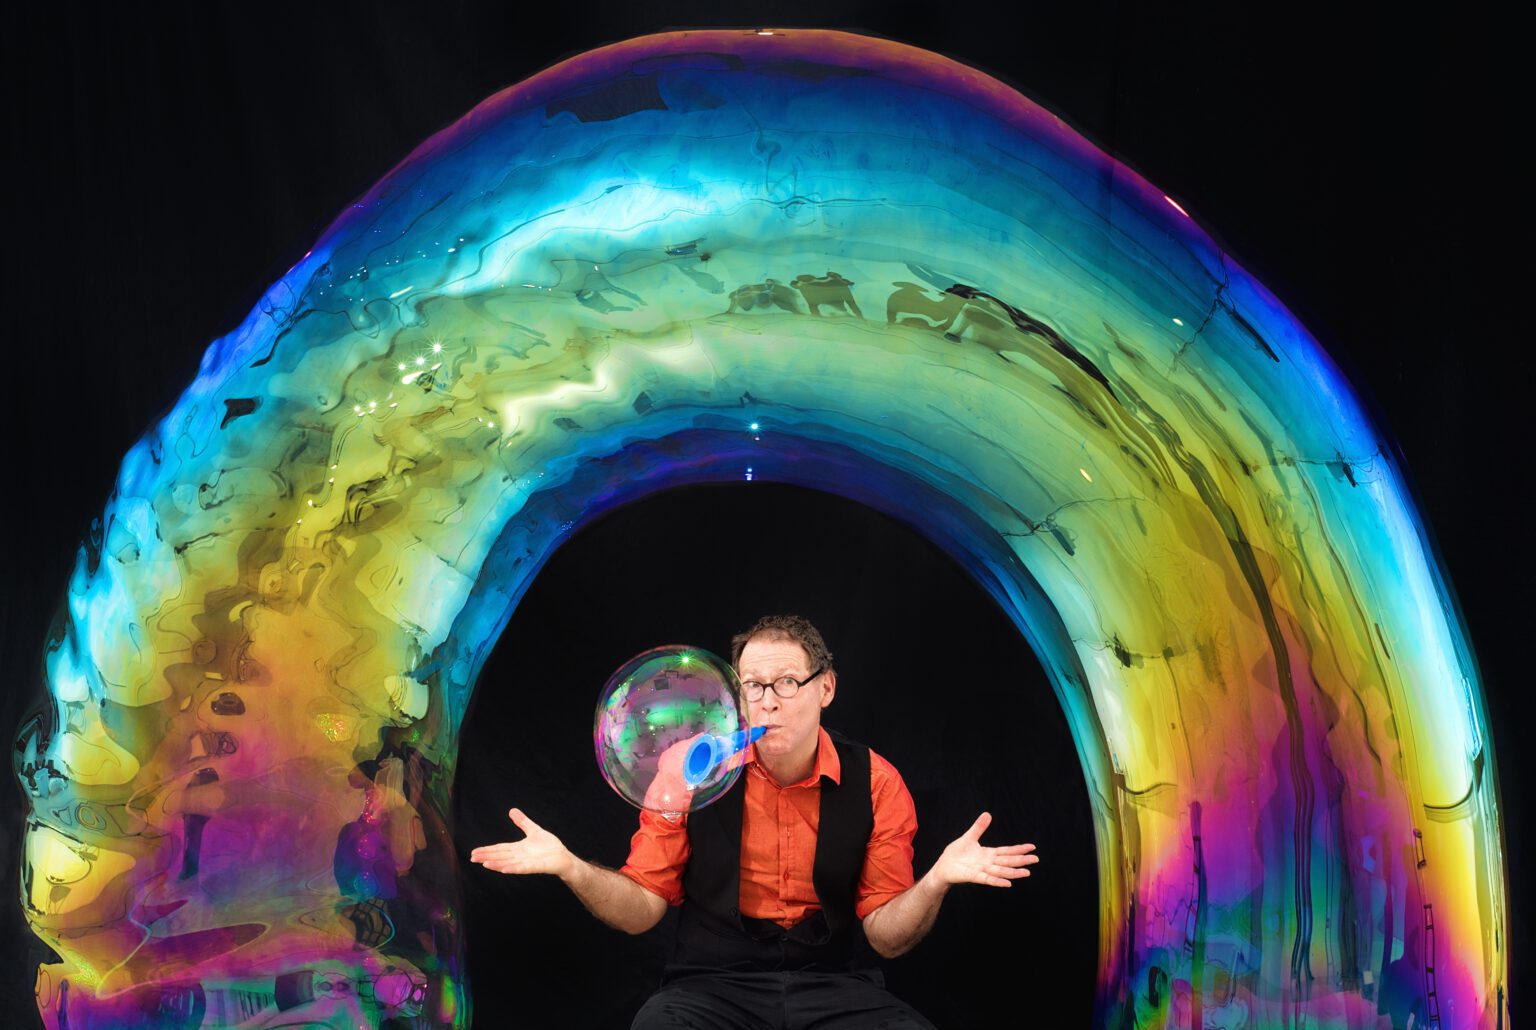 Louis Pearl — also known as The Amazing Bubble Man — will share the art